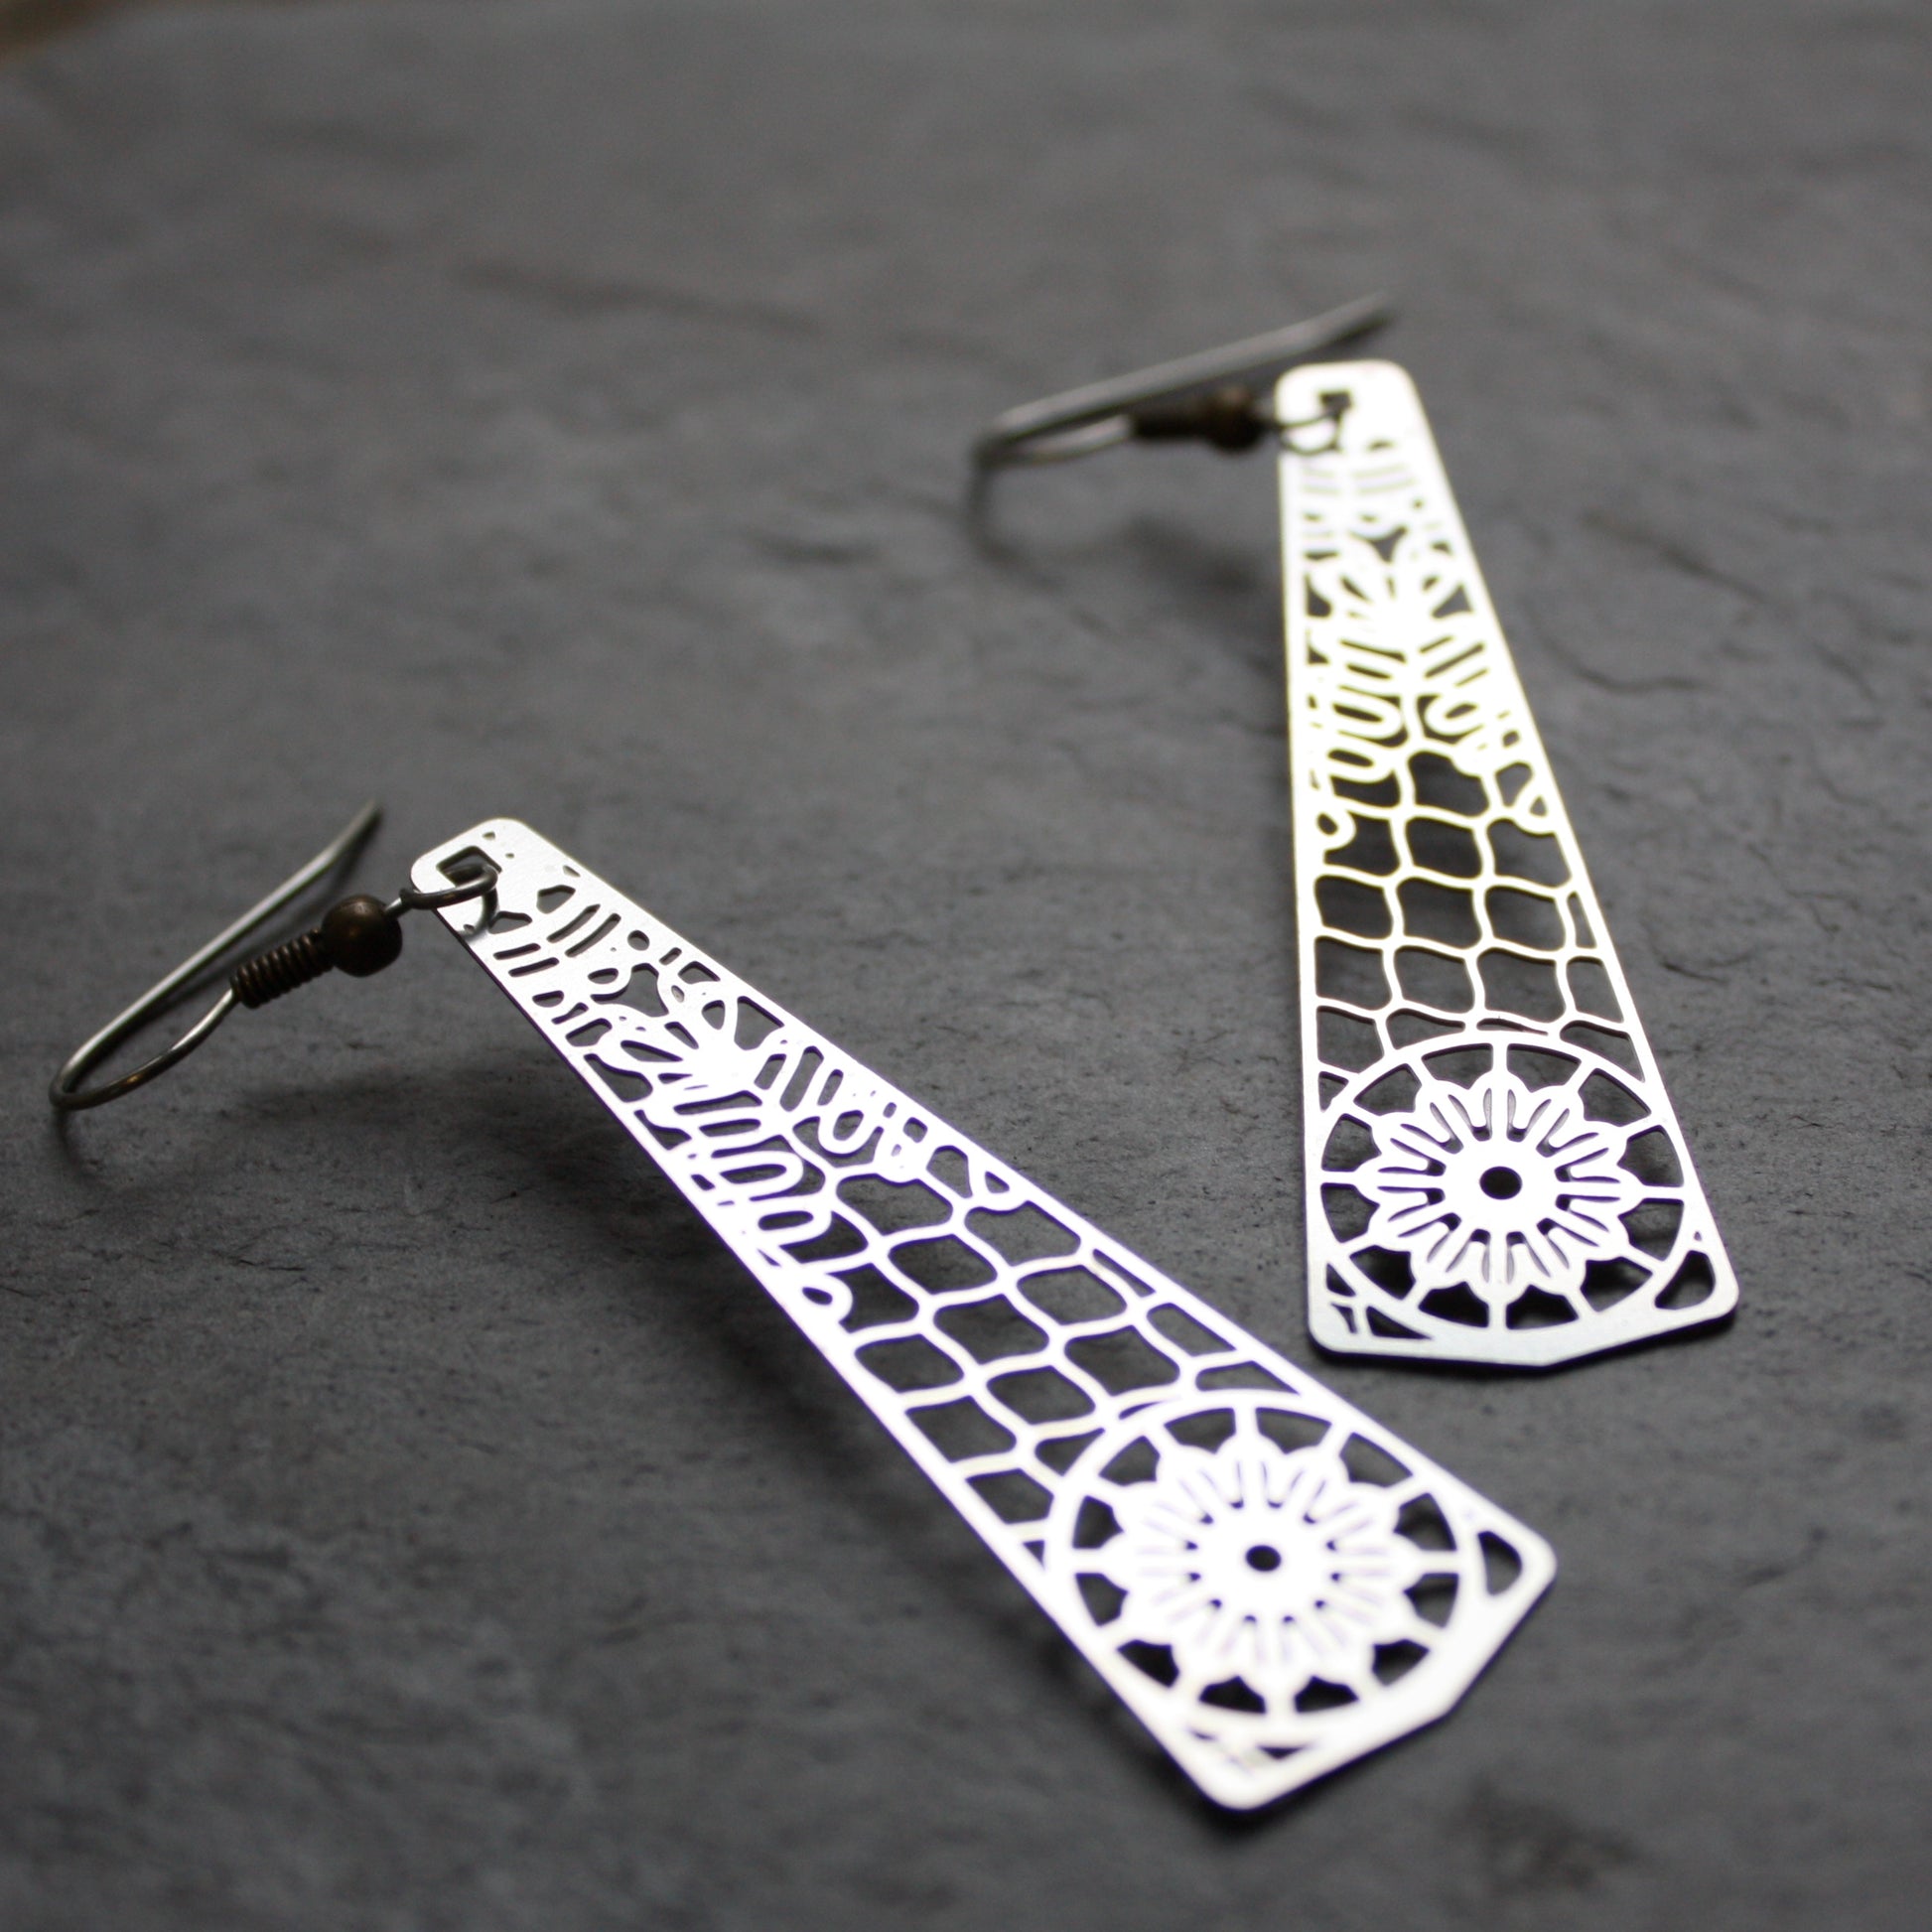 Stainless steel lace earrings by audra azoury